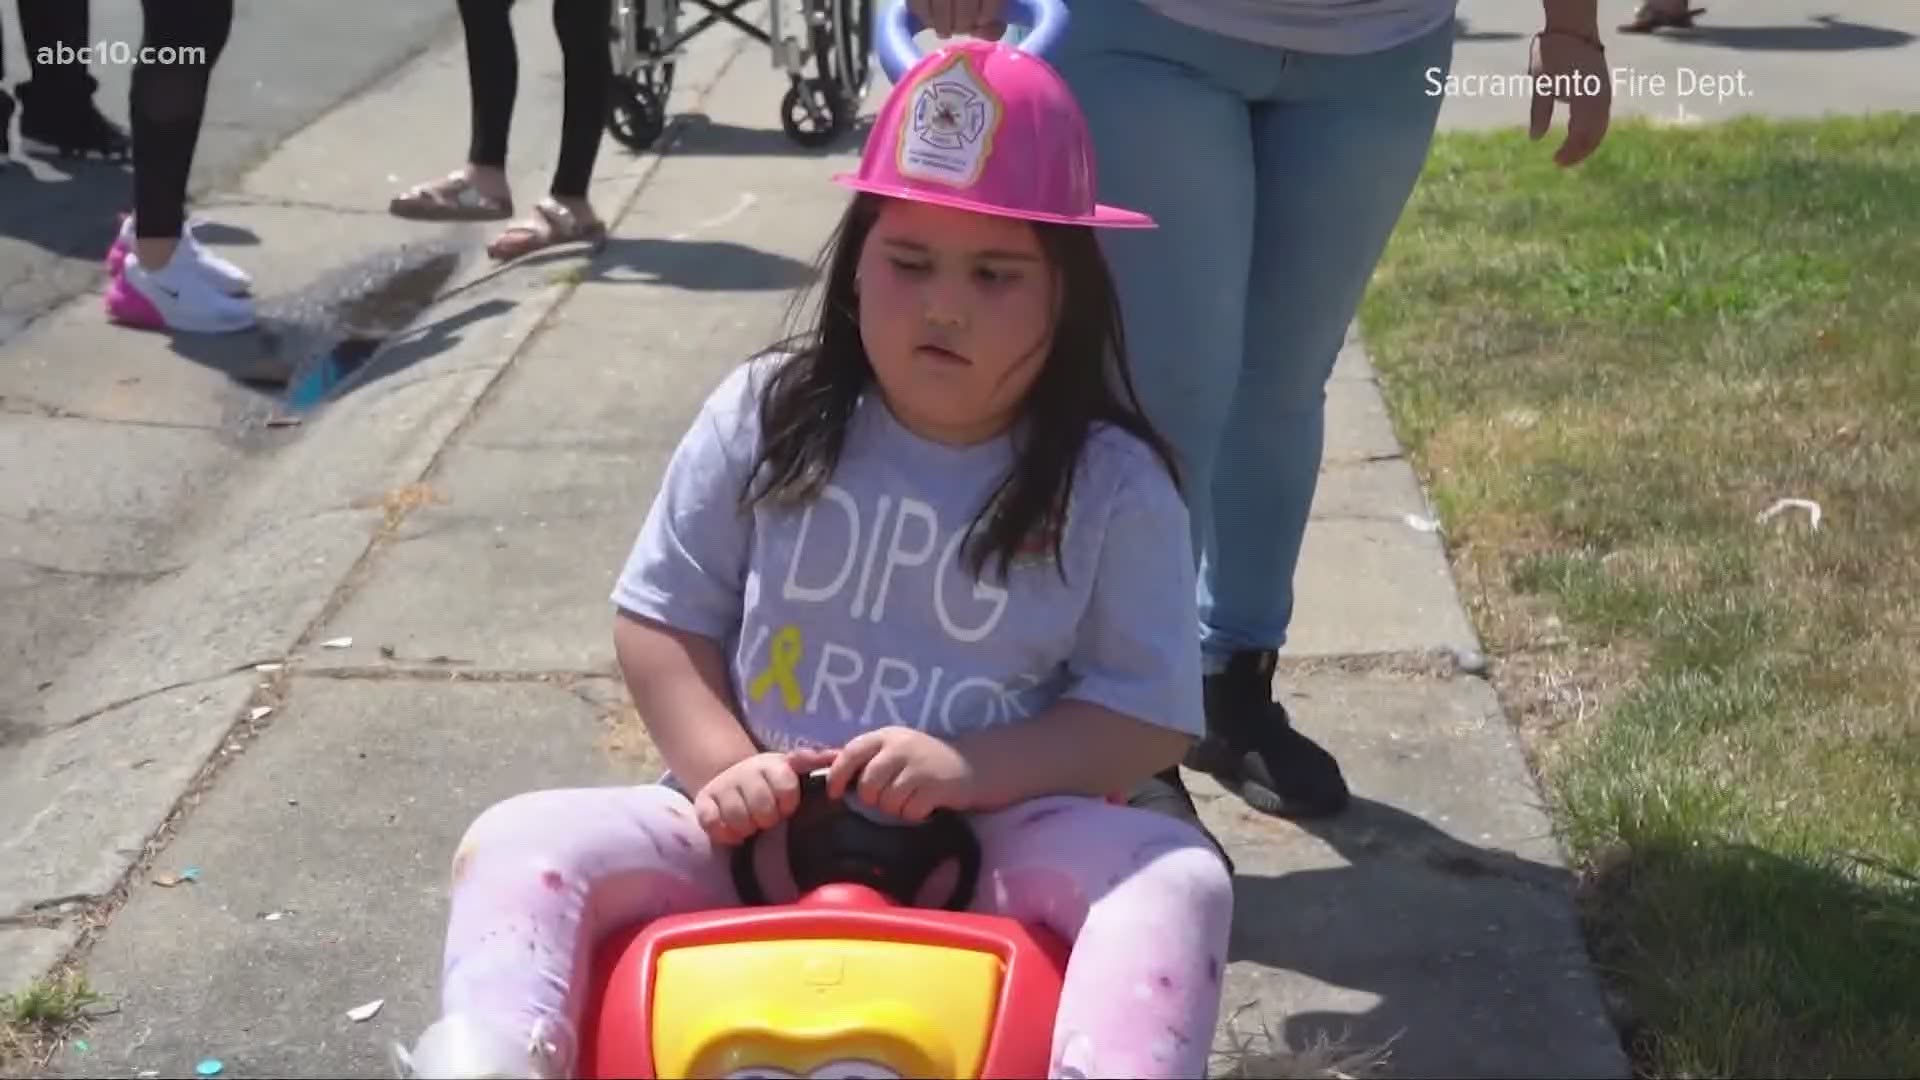 7-year-old Alayna Vargas is fighting a brain tumor and because of her courage, the department wanted to honor her by making her an honorary member.